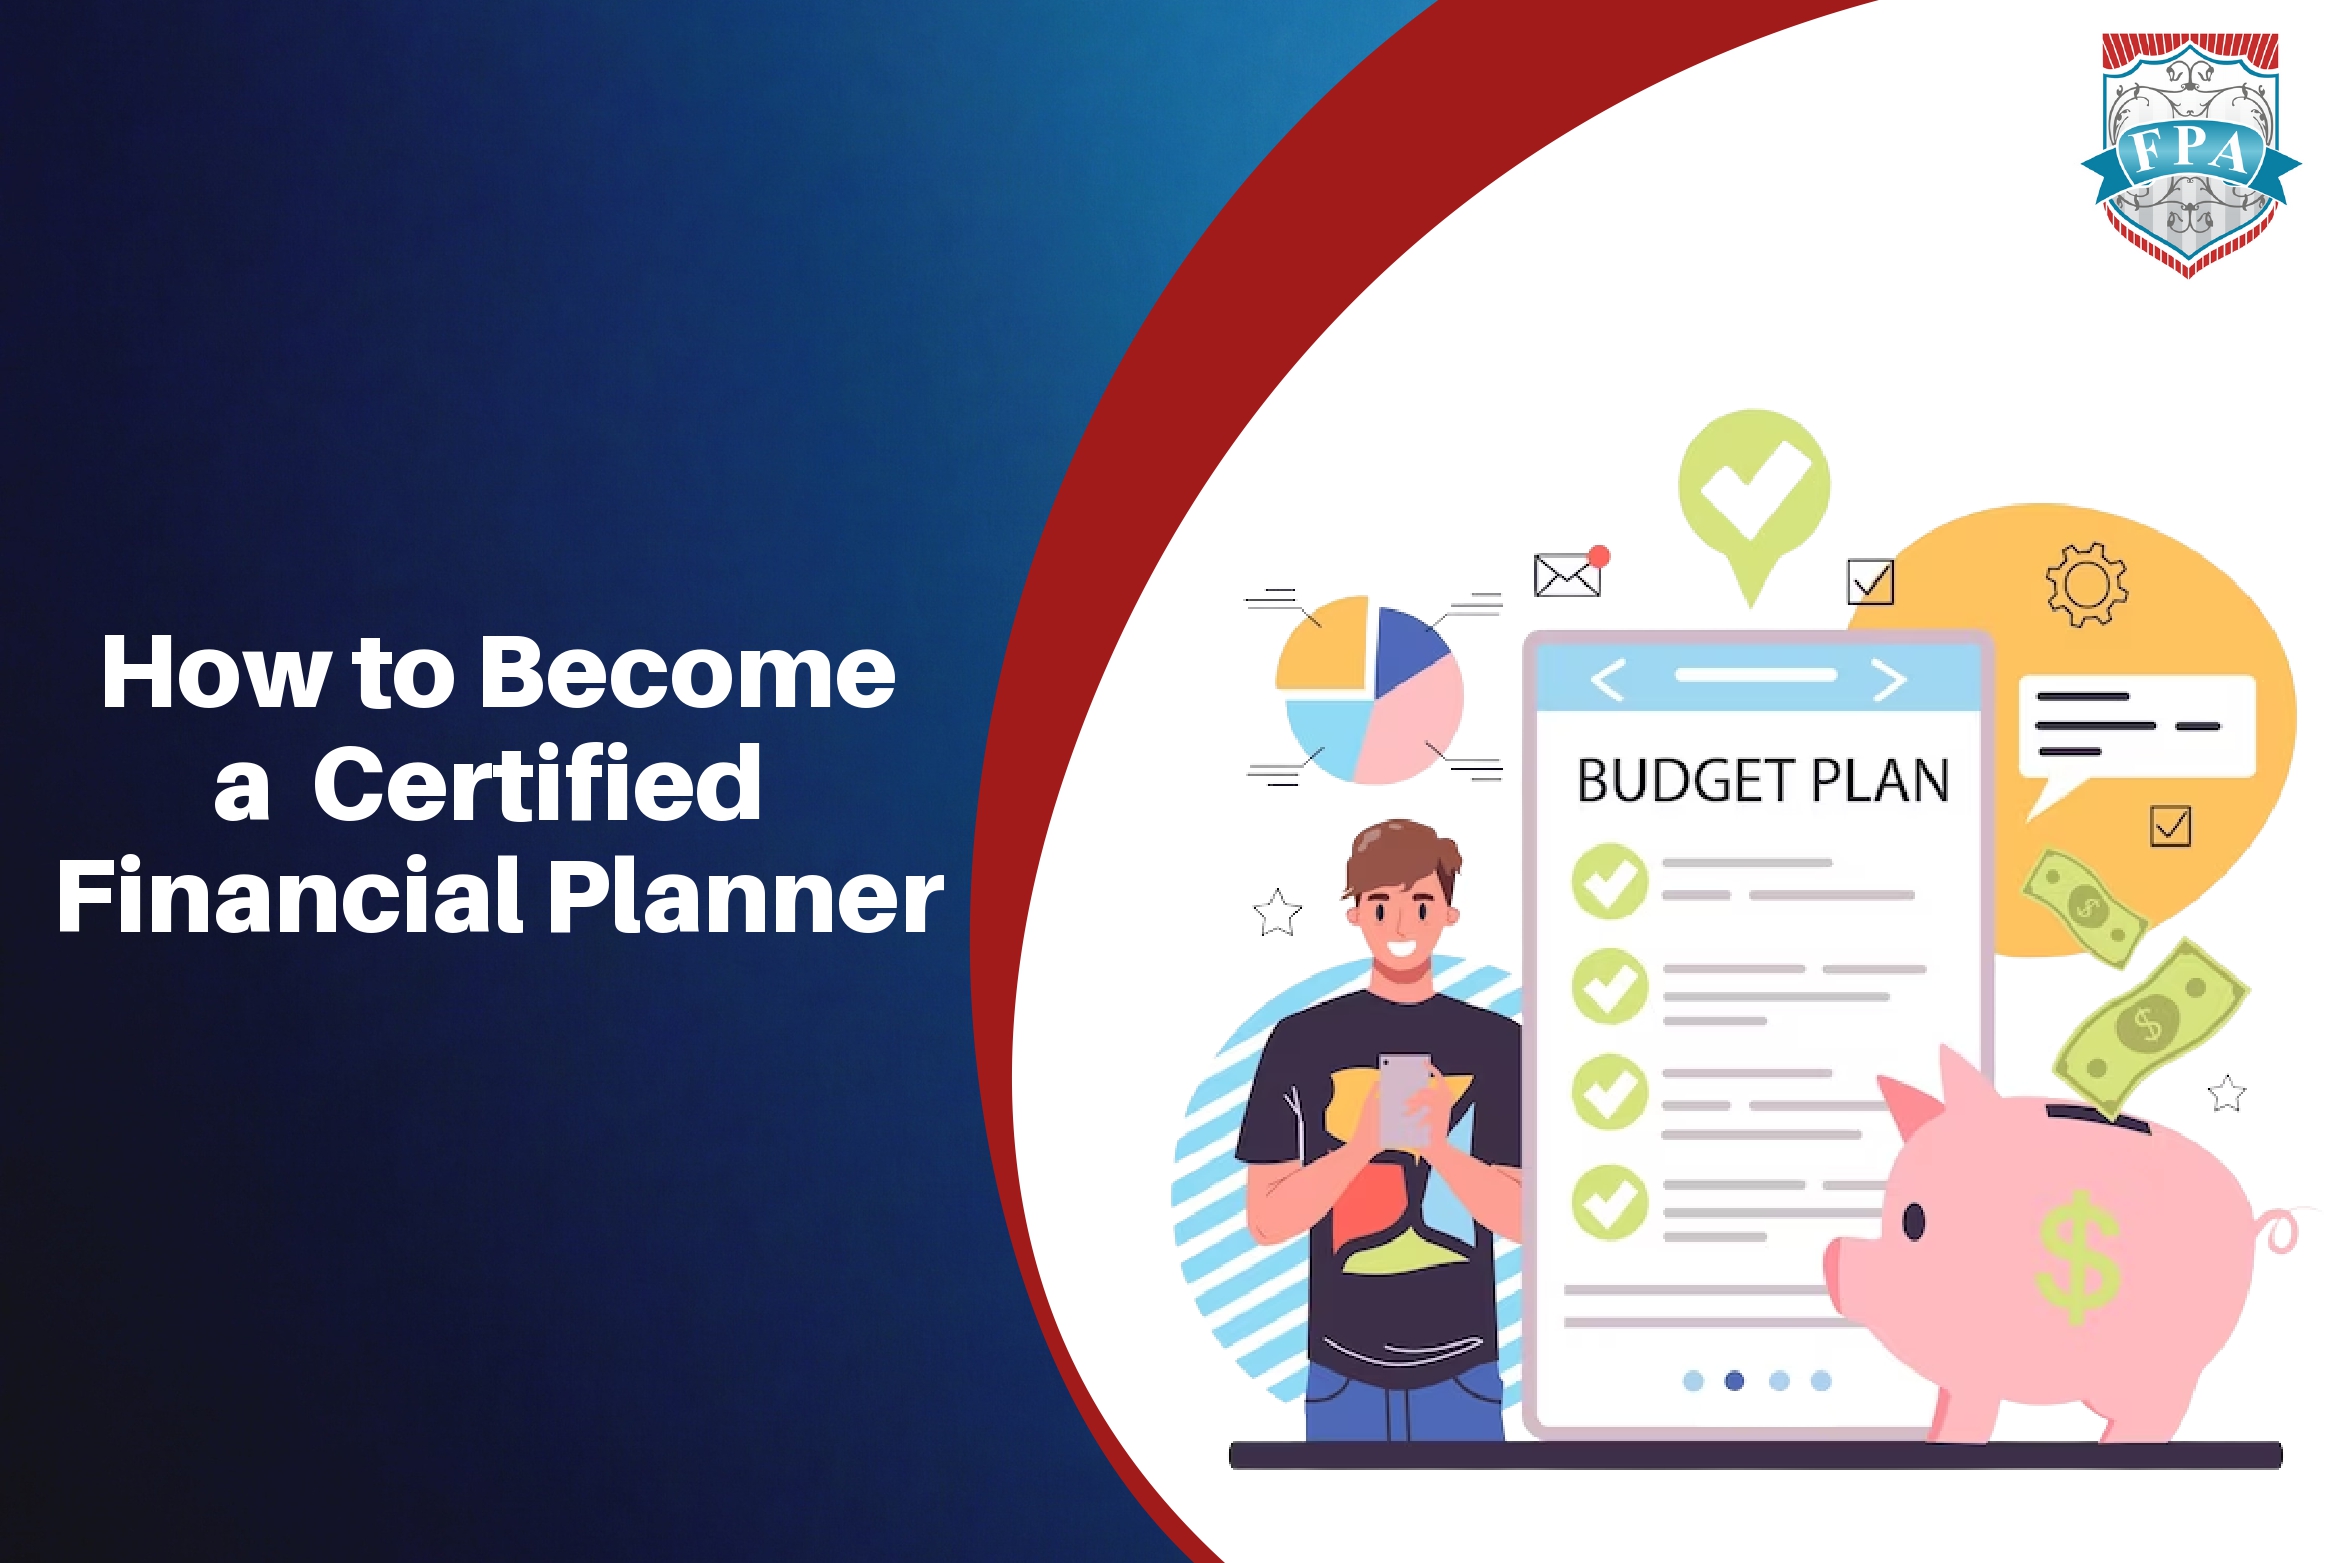 How to Become a Certified Financial Planner